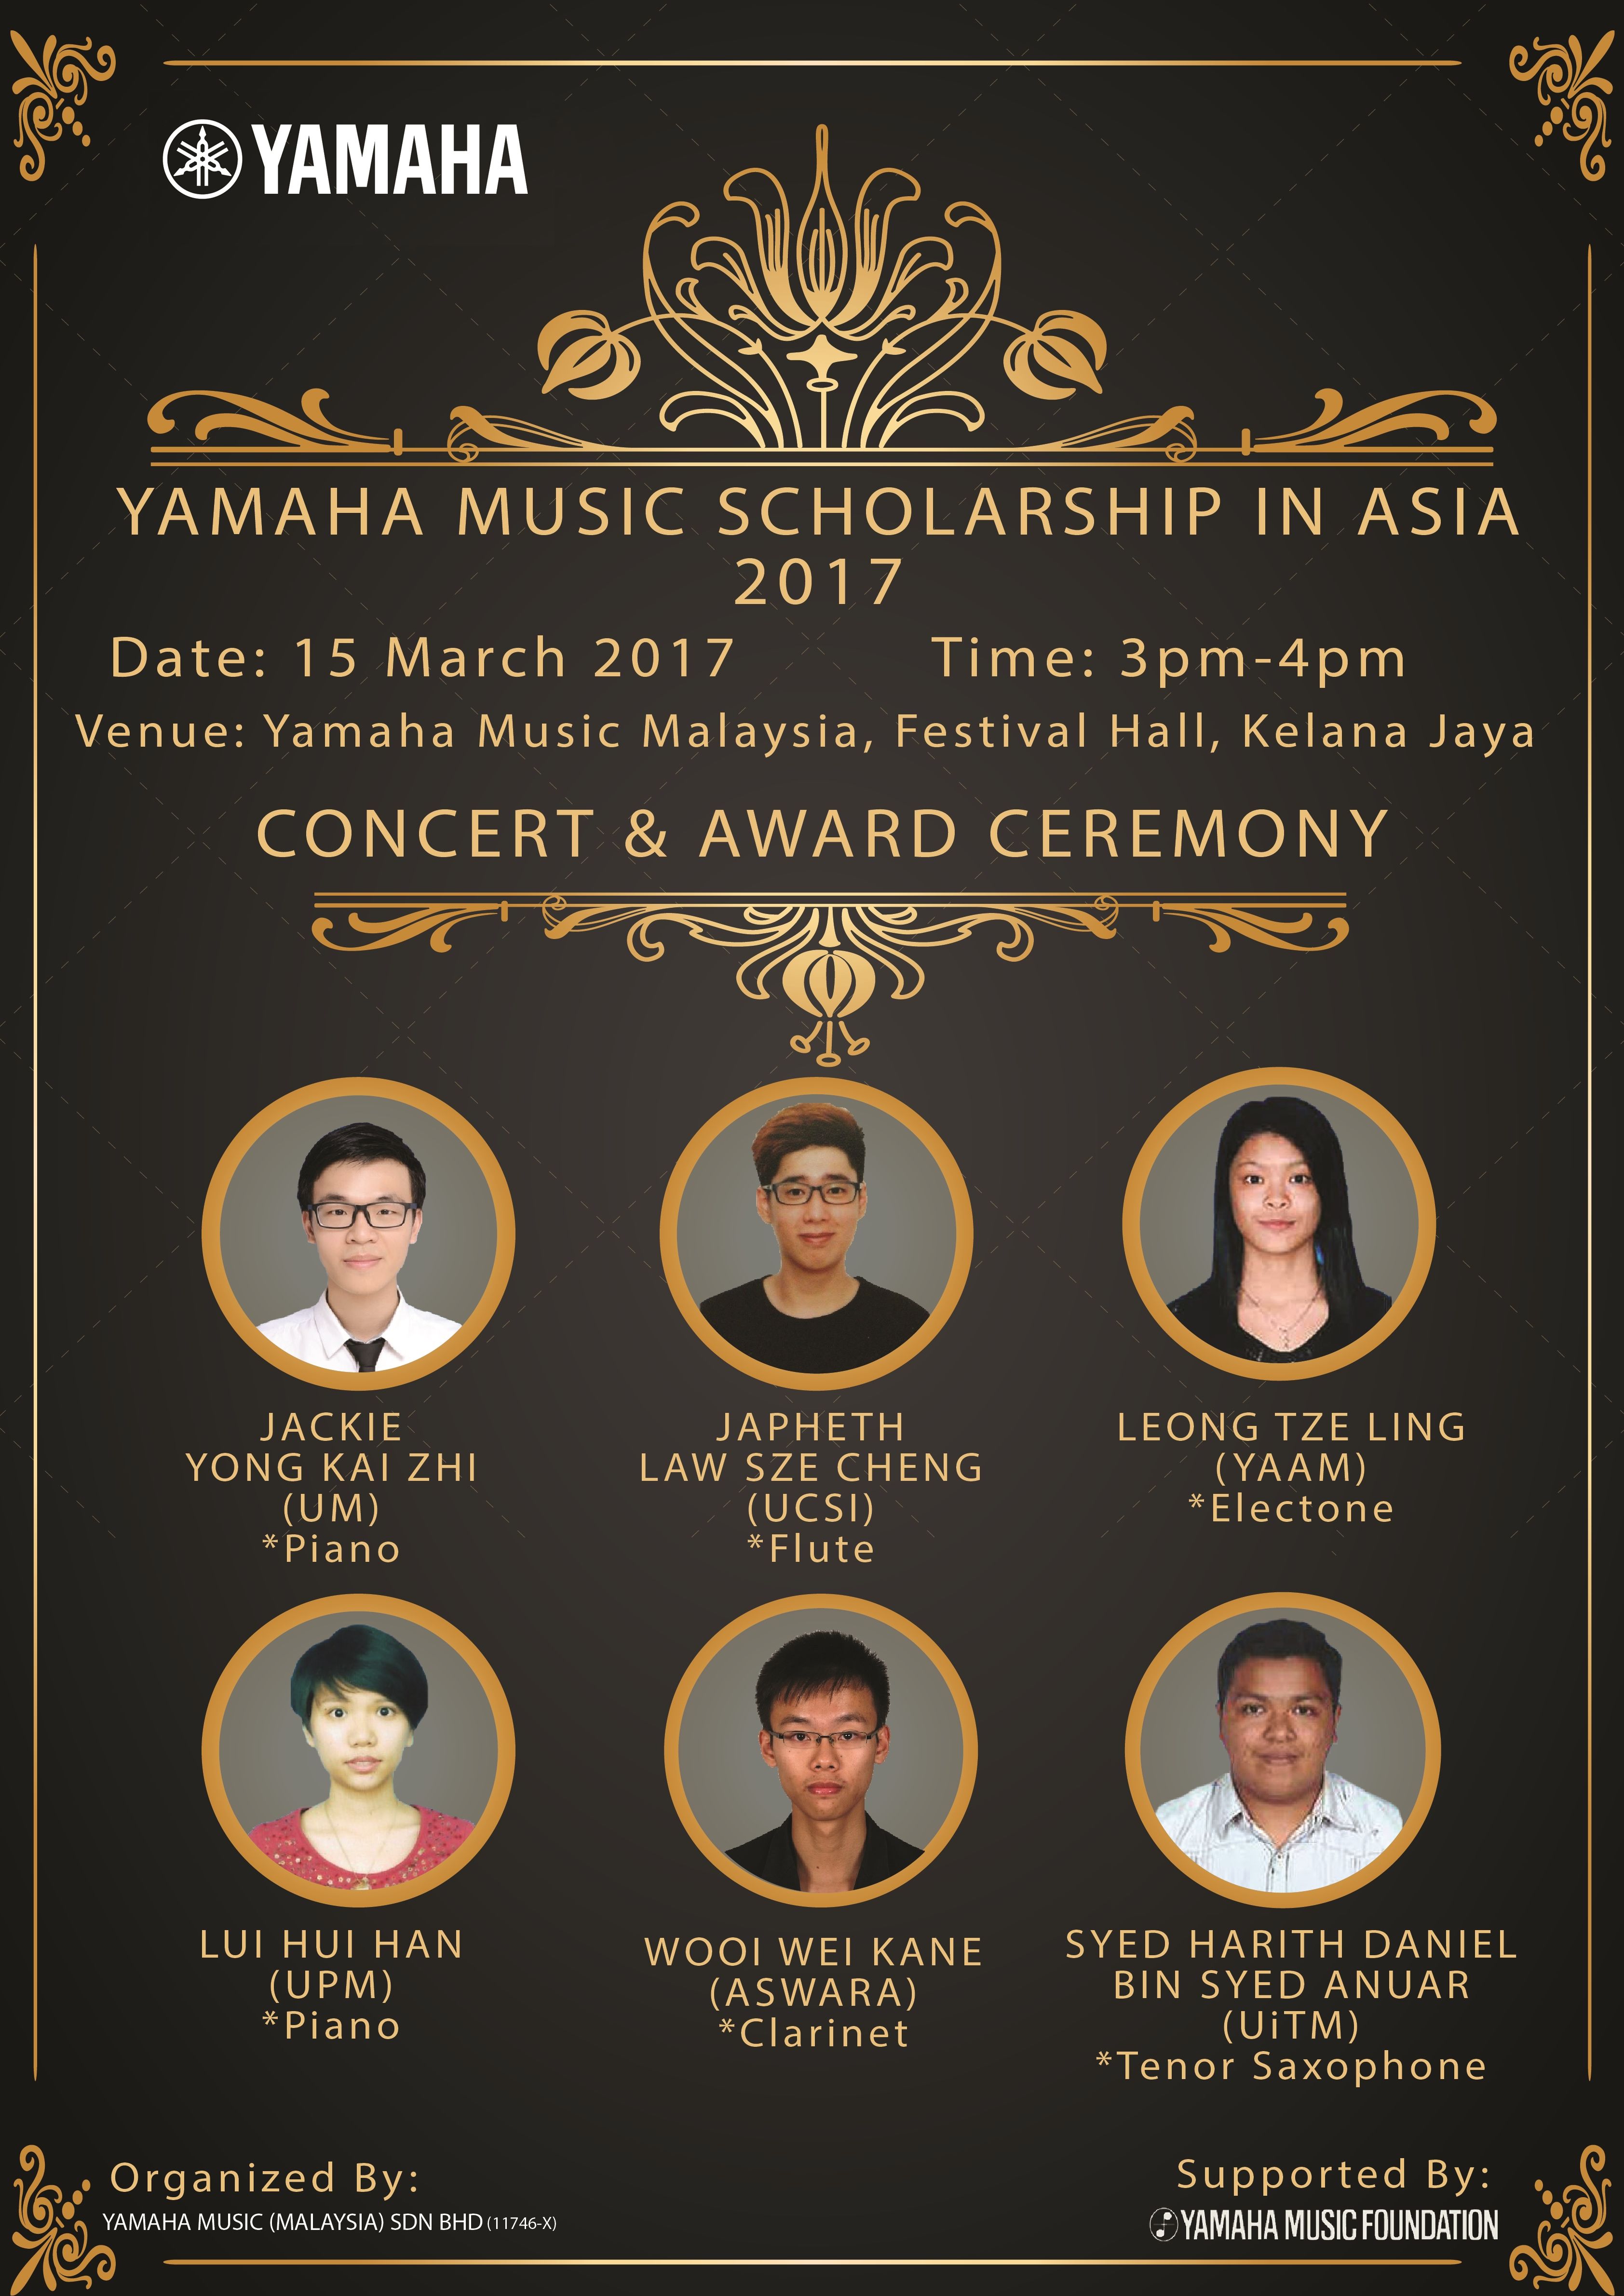 Congratulations to recipients of the Yamaha Music Scholarship Asia 2017